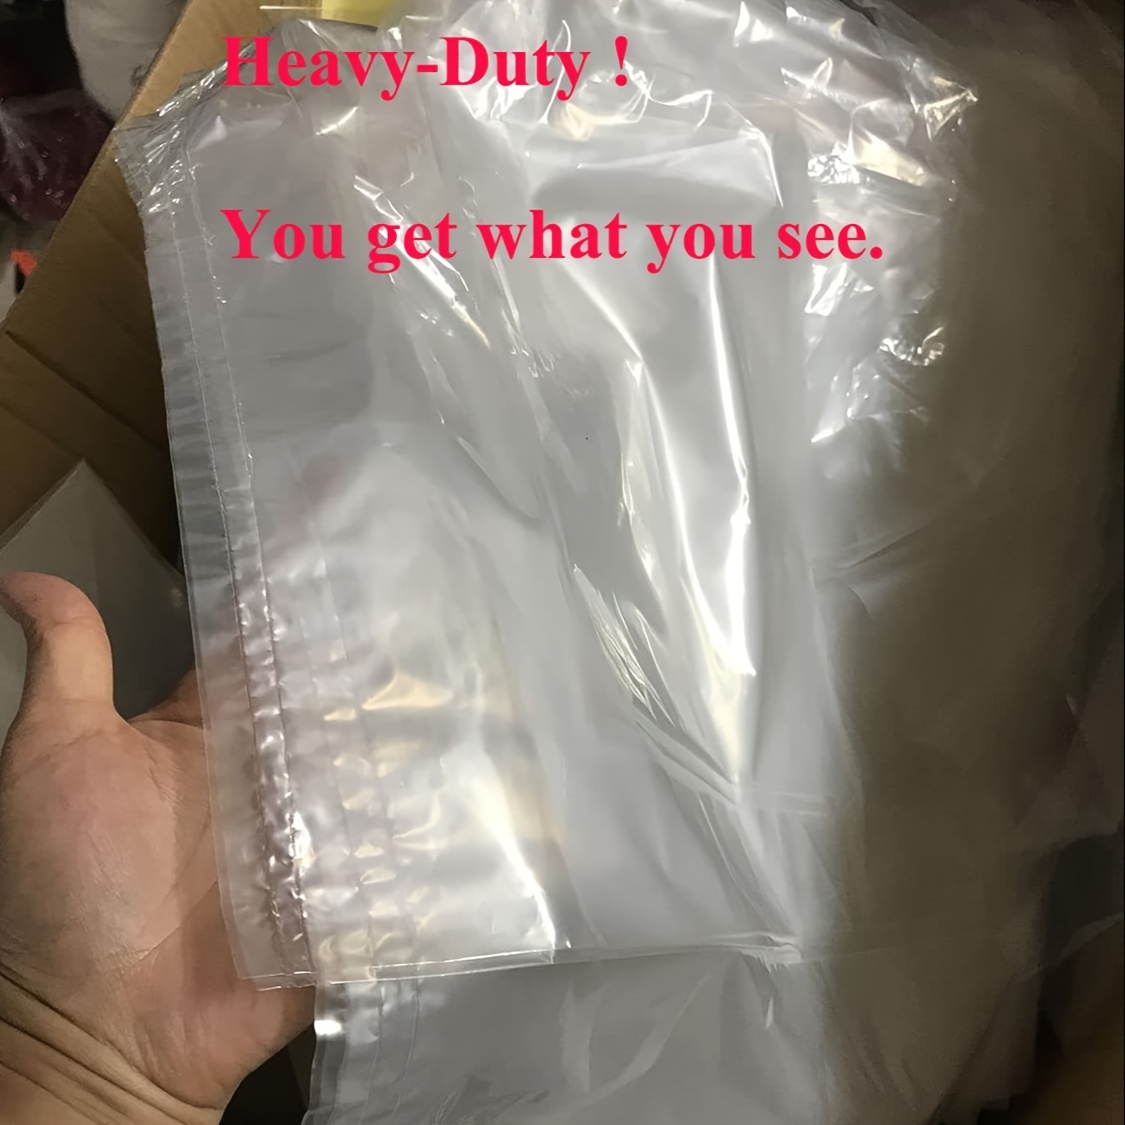 Large Balloon Bags for Transport, Balloon Transport Bags, 2 Pcs 98 X 59  Inches Thick Plastic Balloon Drop Bags Clear Giant Balloon Storage Bags for